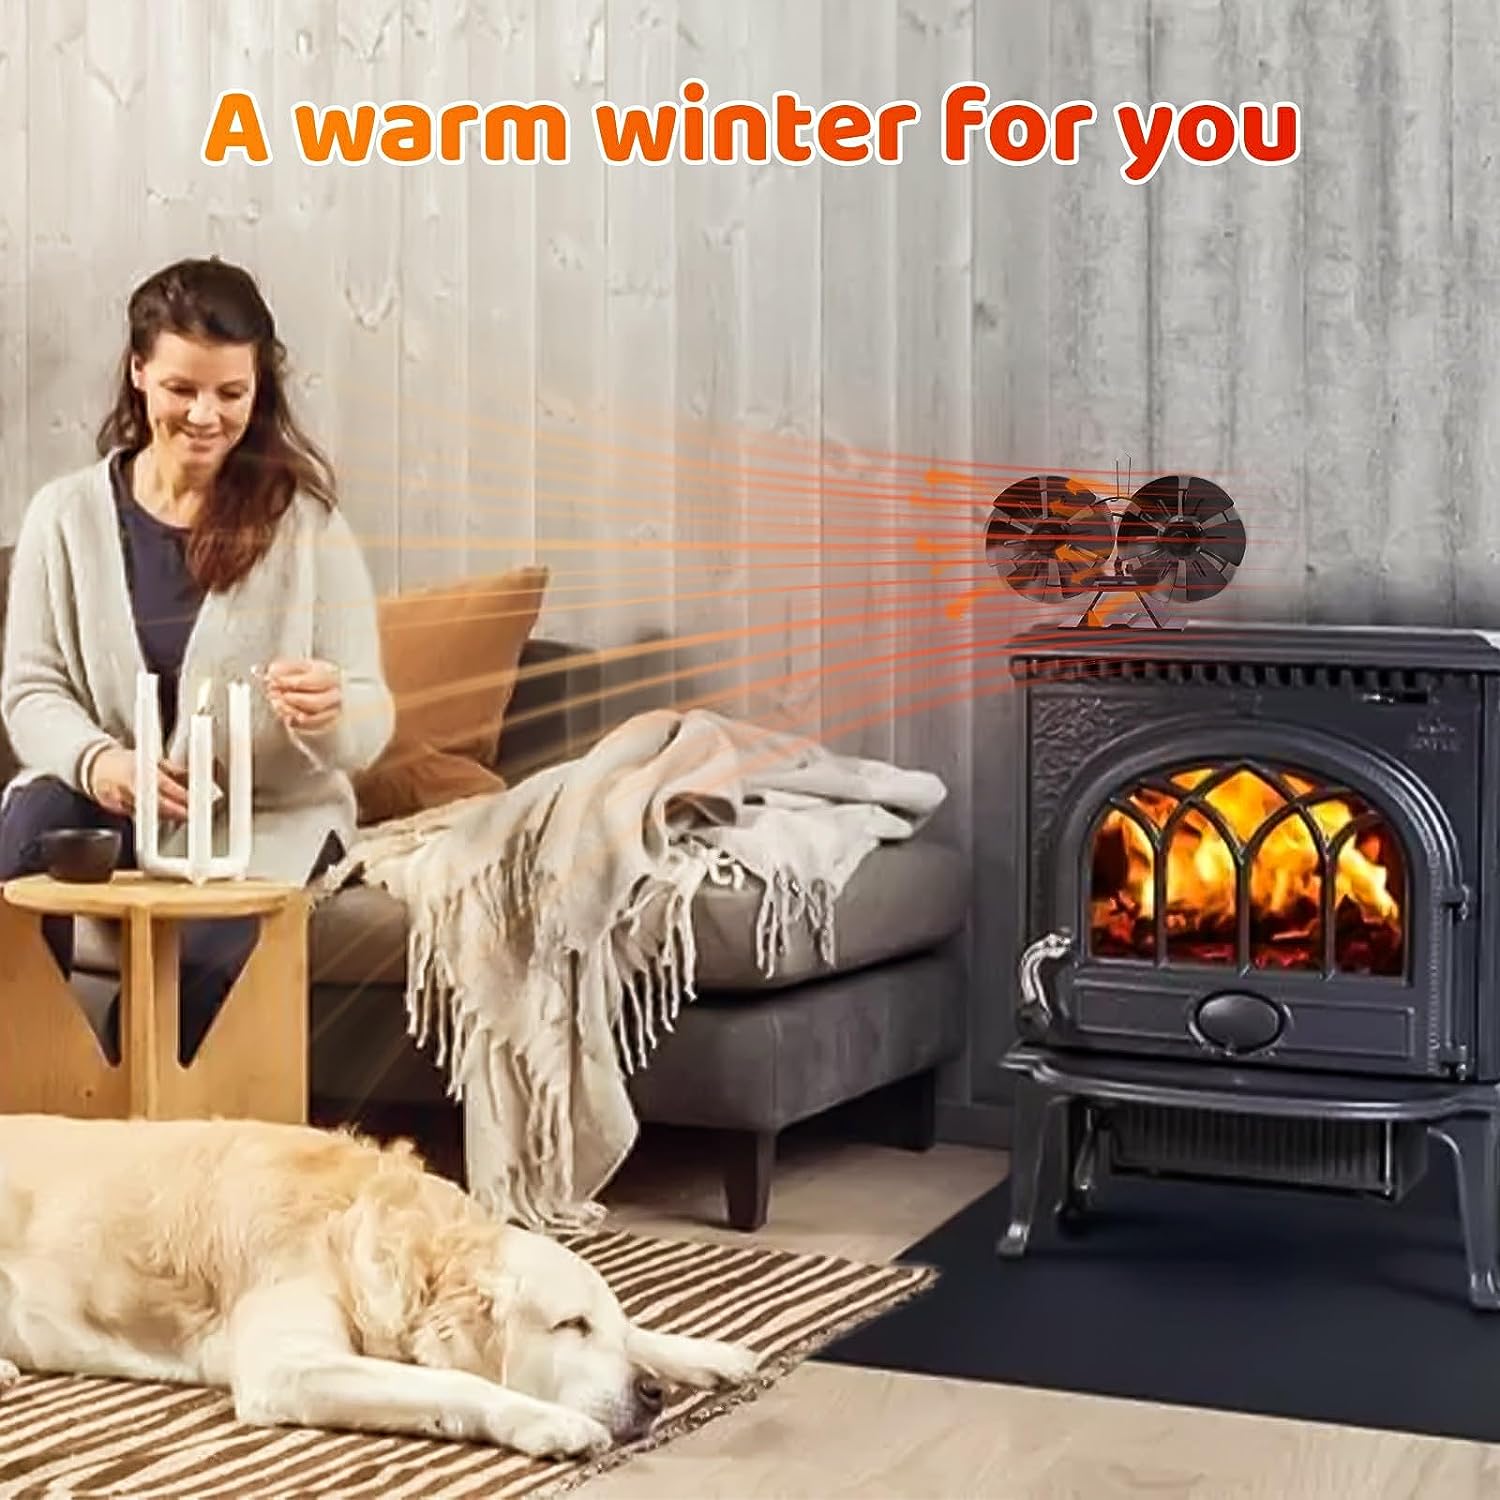 Wood burning heat powered 6 blades stove fan for buddy heater 